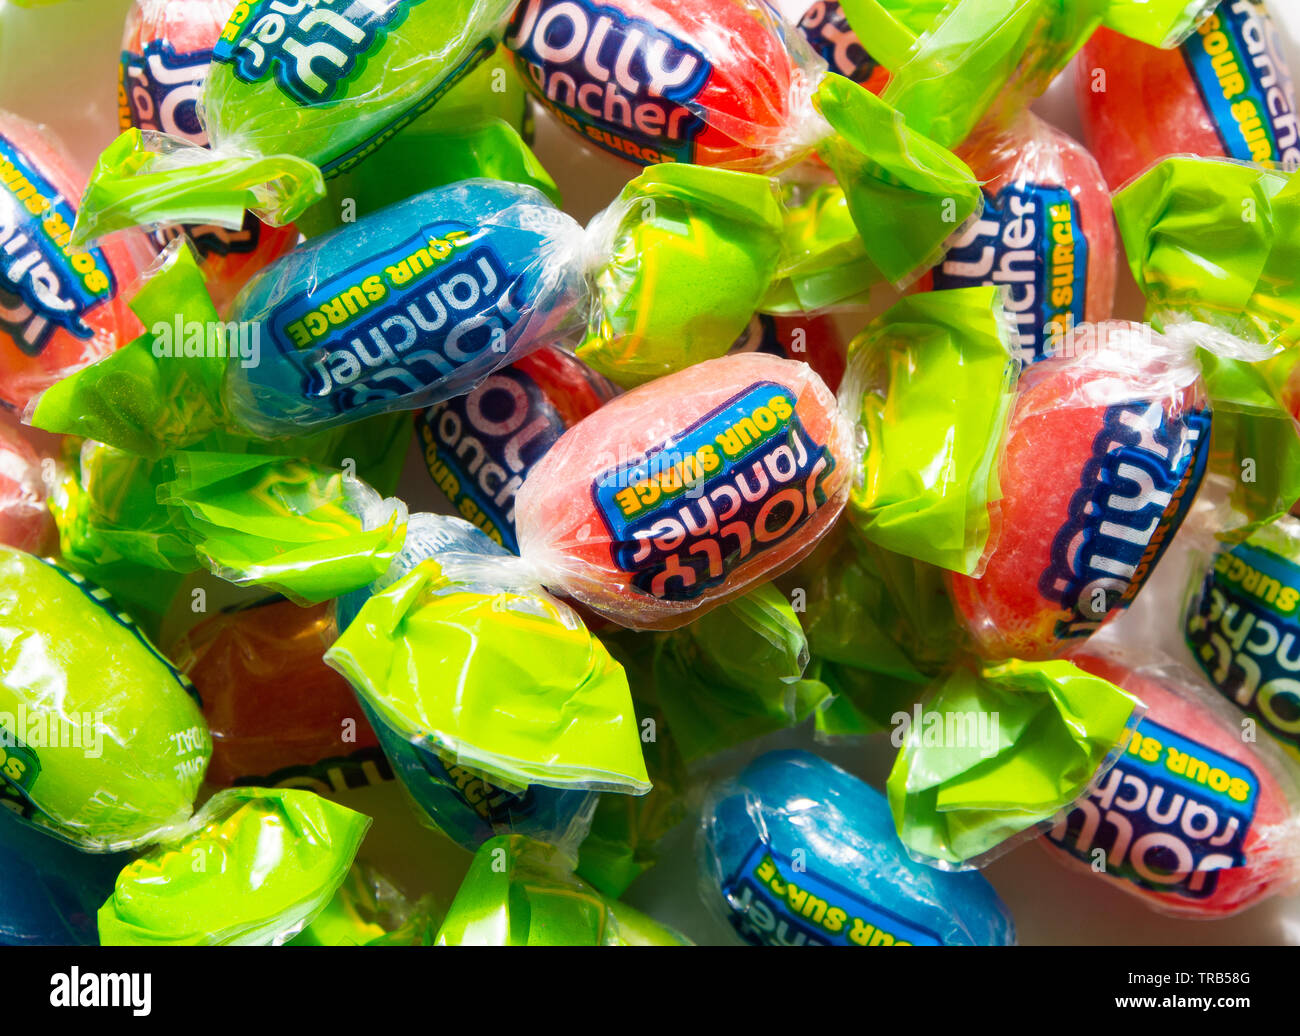 A close up of Jolly Rancher candy Stock Photo